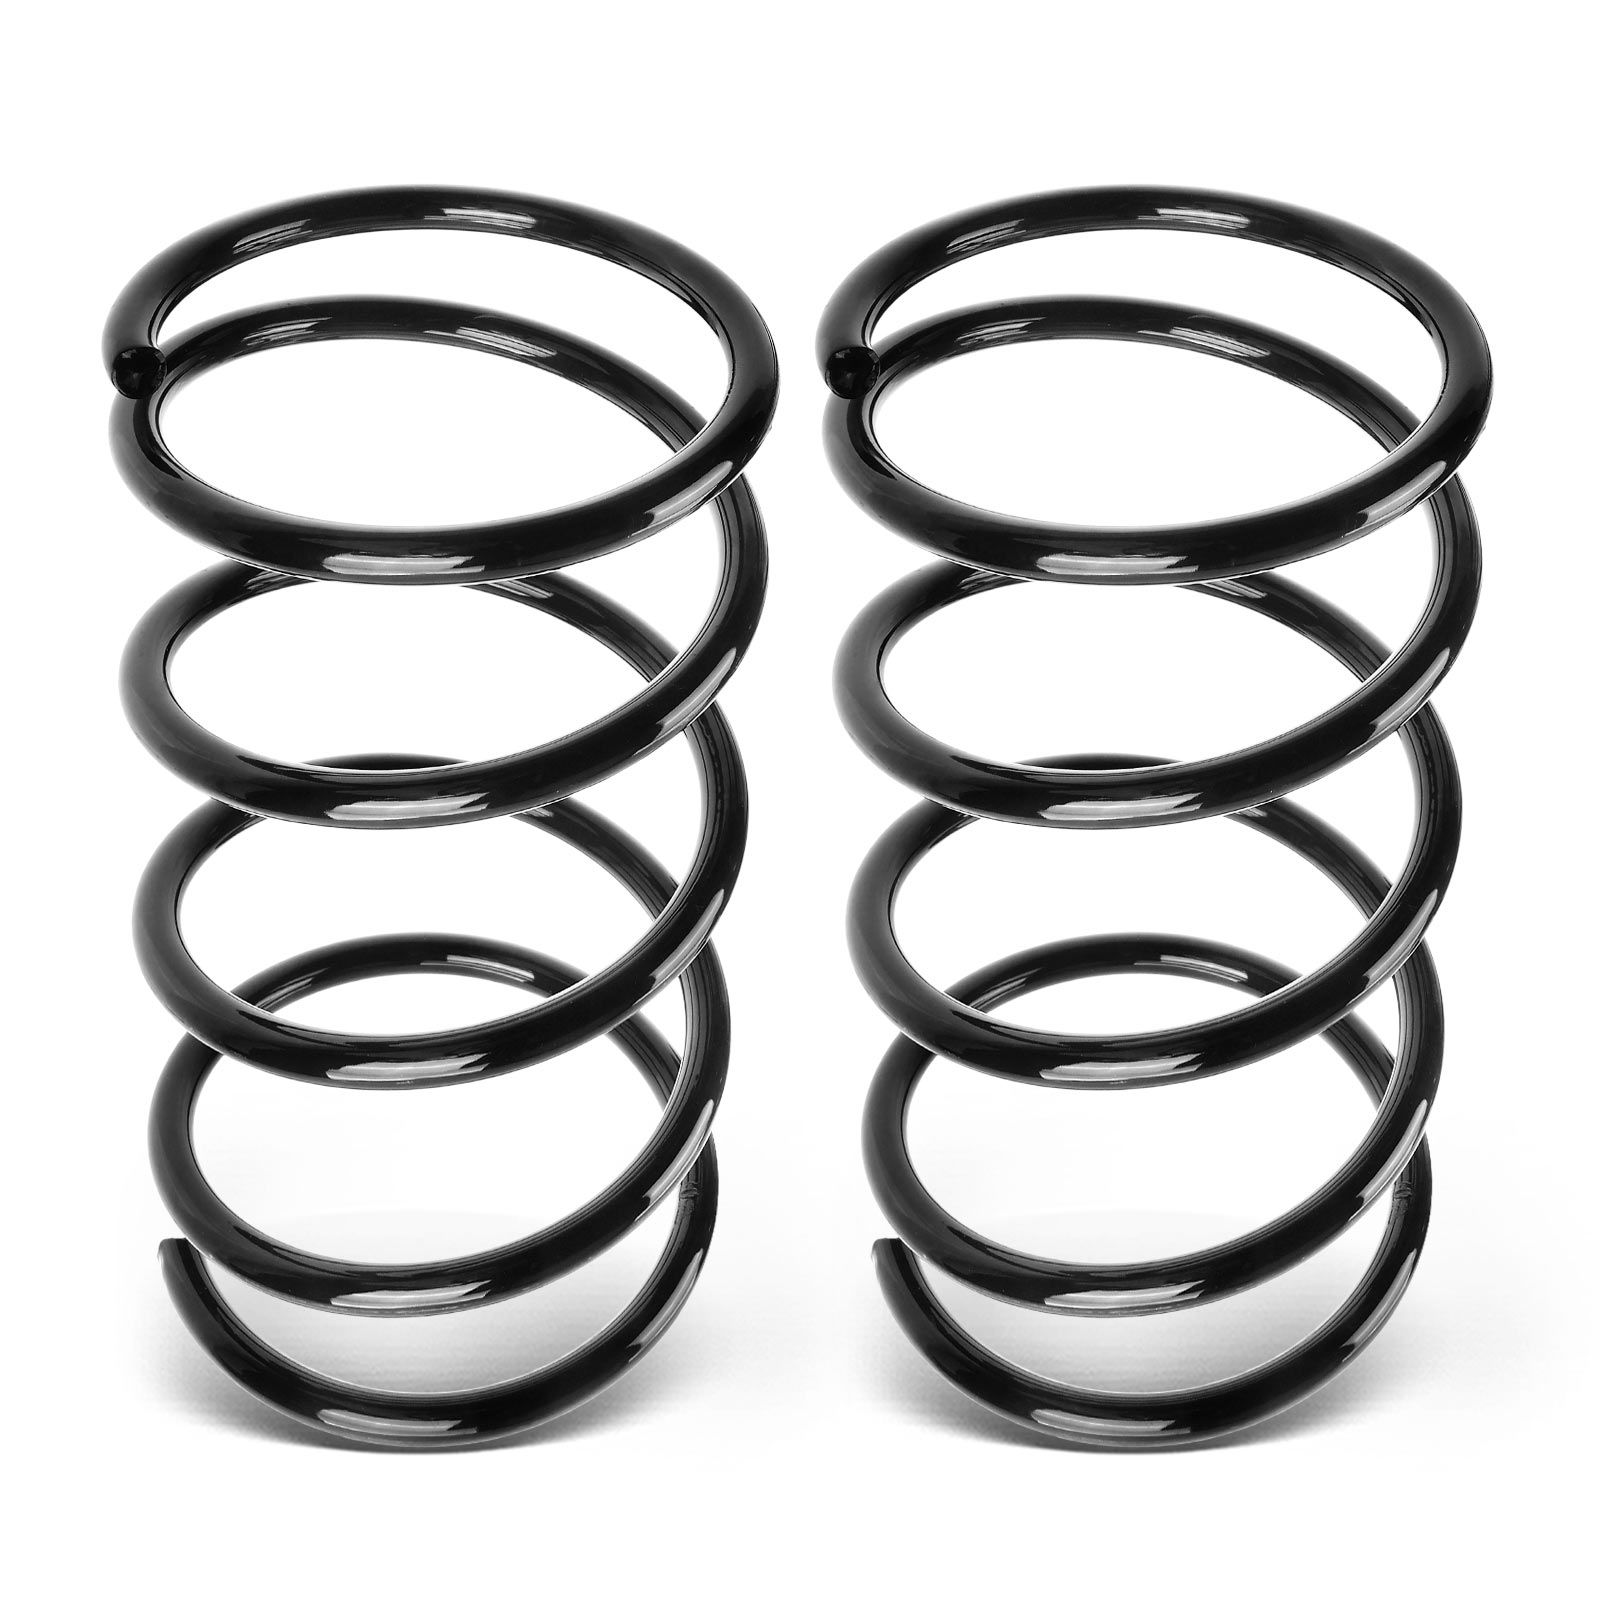 2 Pcs Front Suspension Coil Springs for Honda Civic 2002-2005